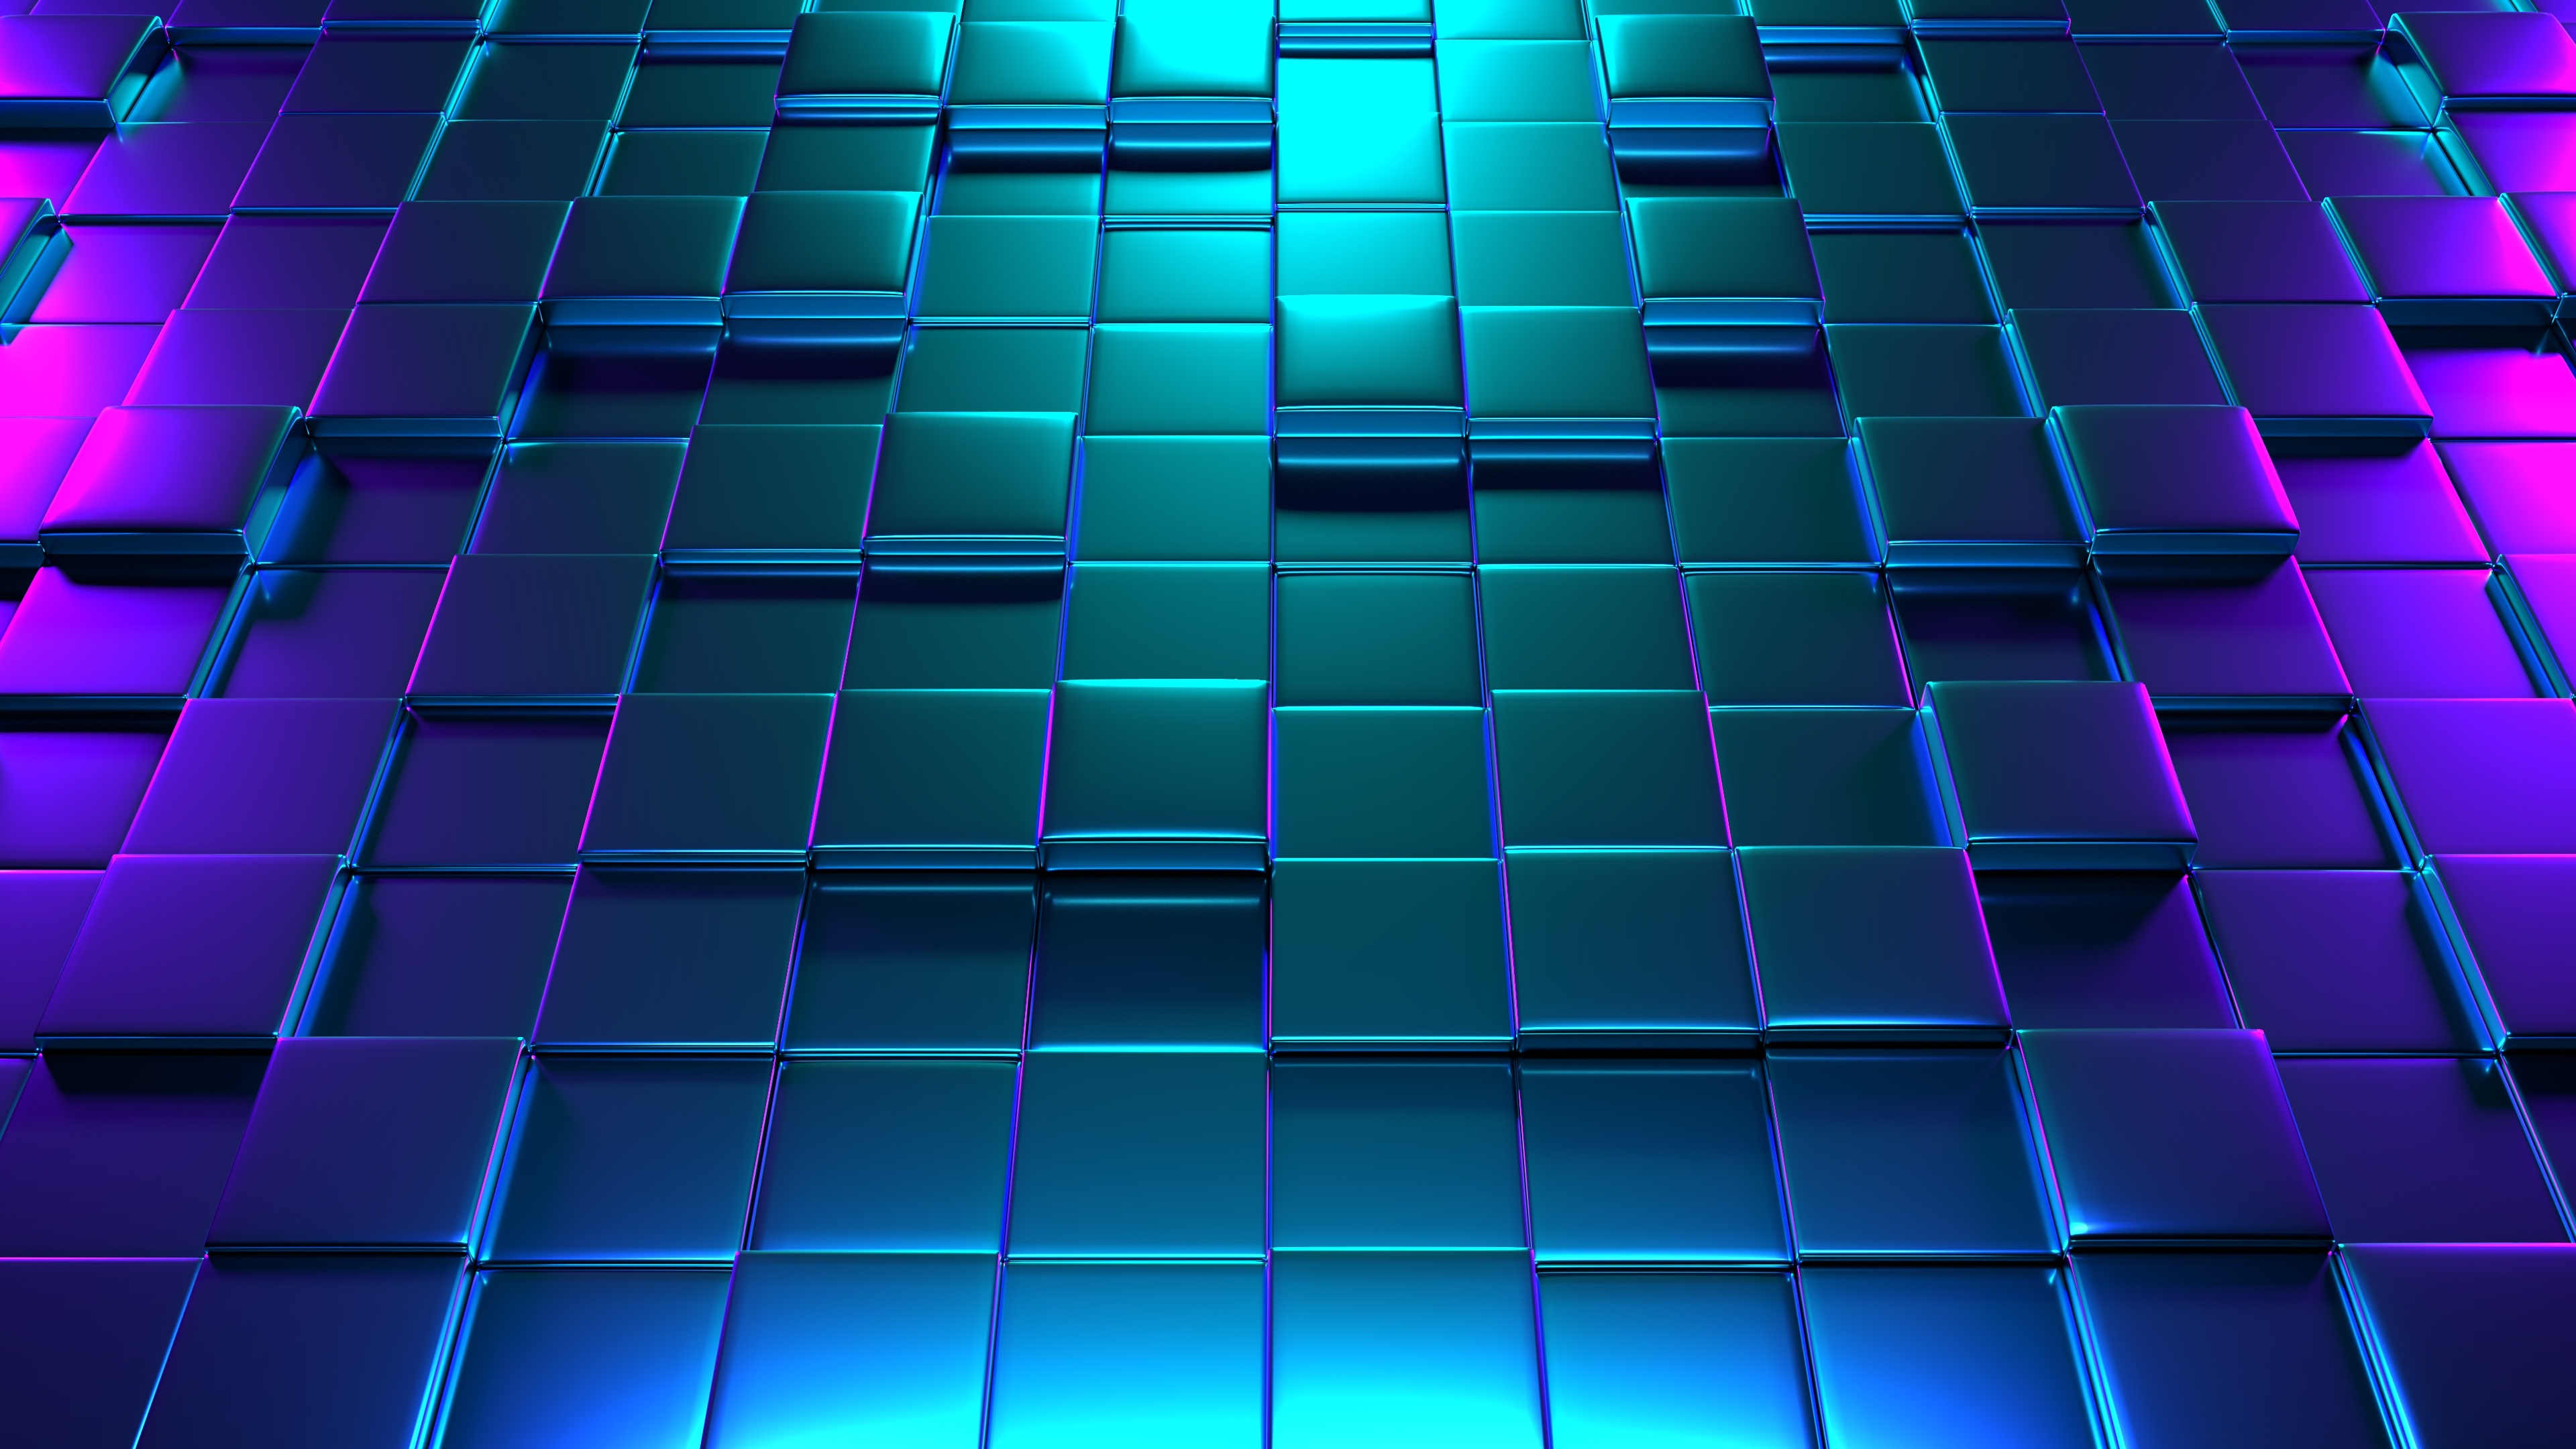 3D Cube Background 4K Wallpaper,Hd 3D Wallpapers,4K Wallpapers,Images